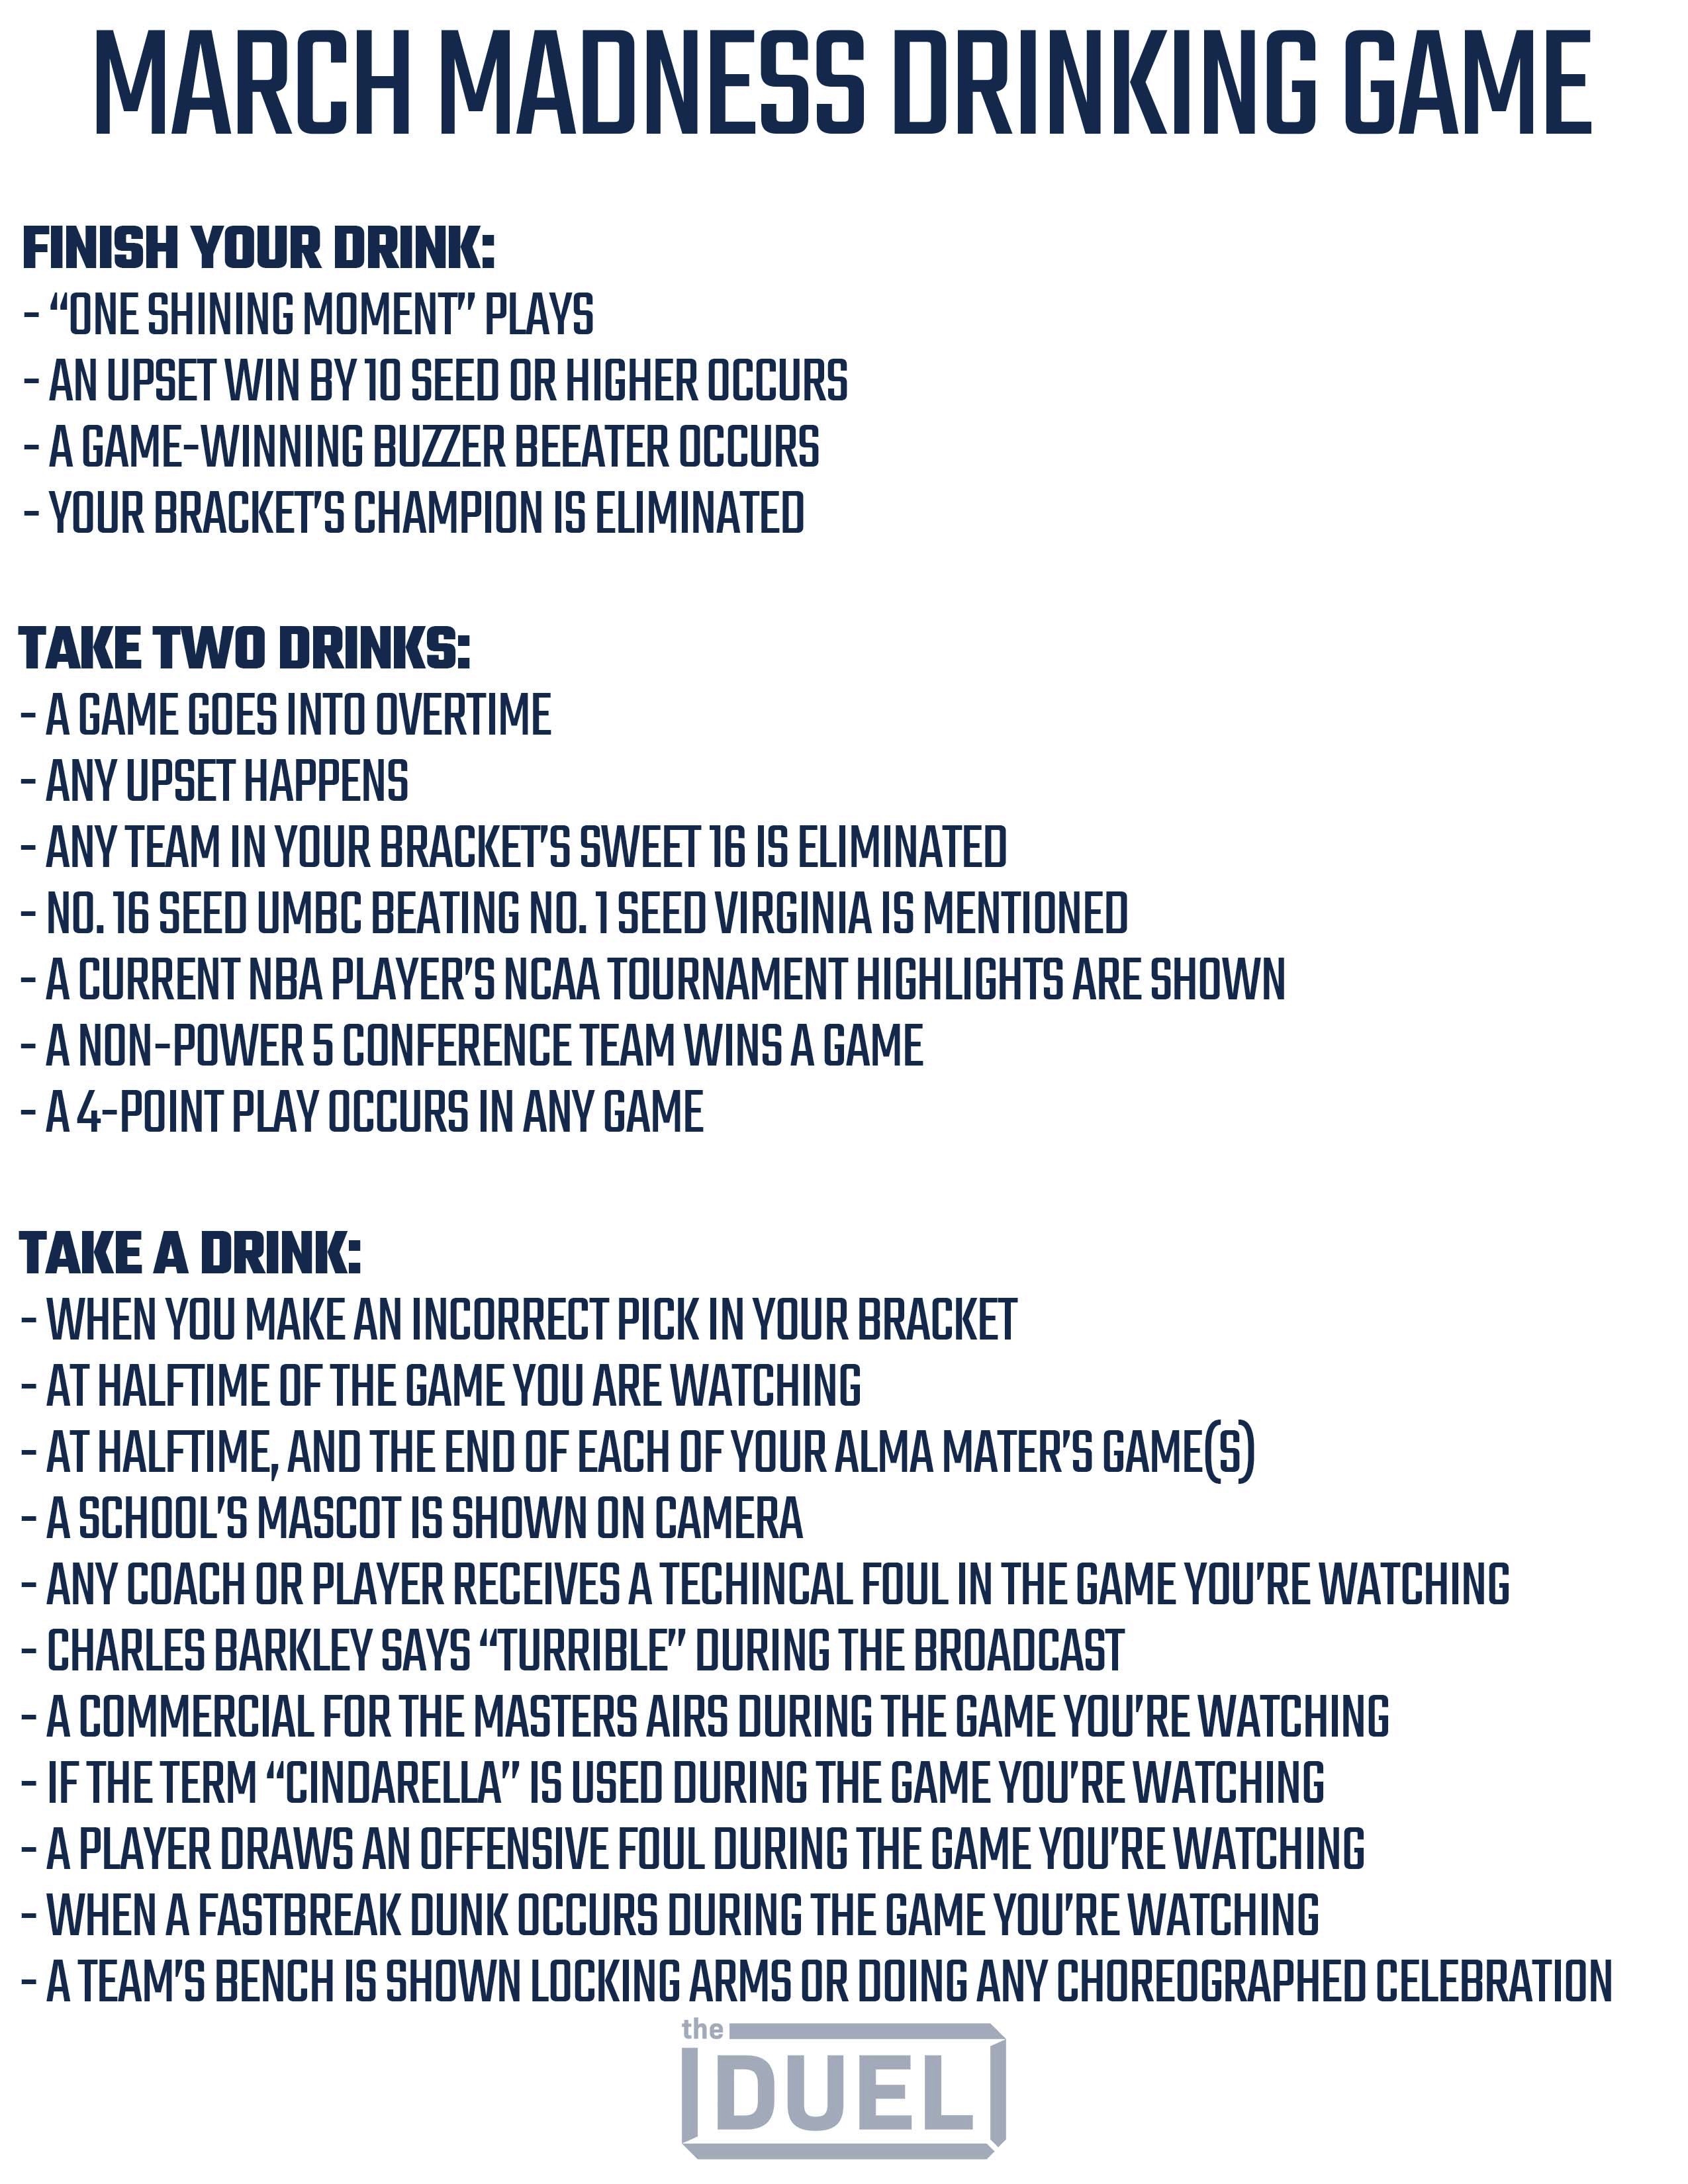 Photo: march madness drinking games